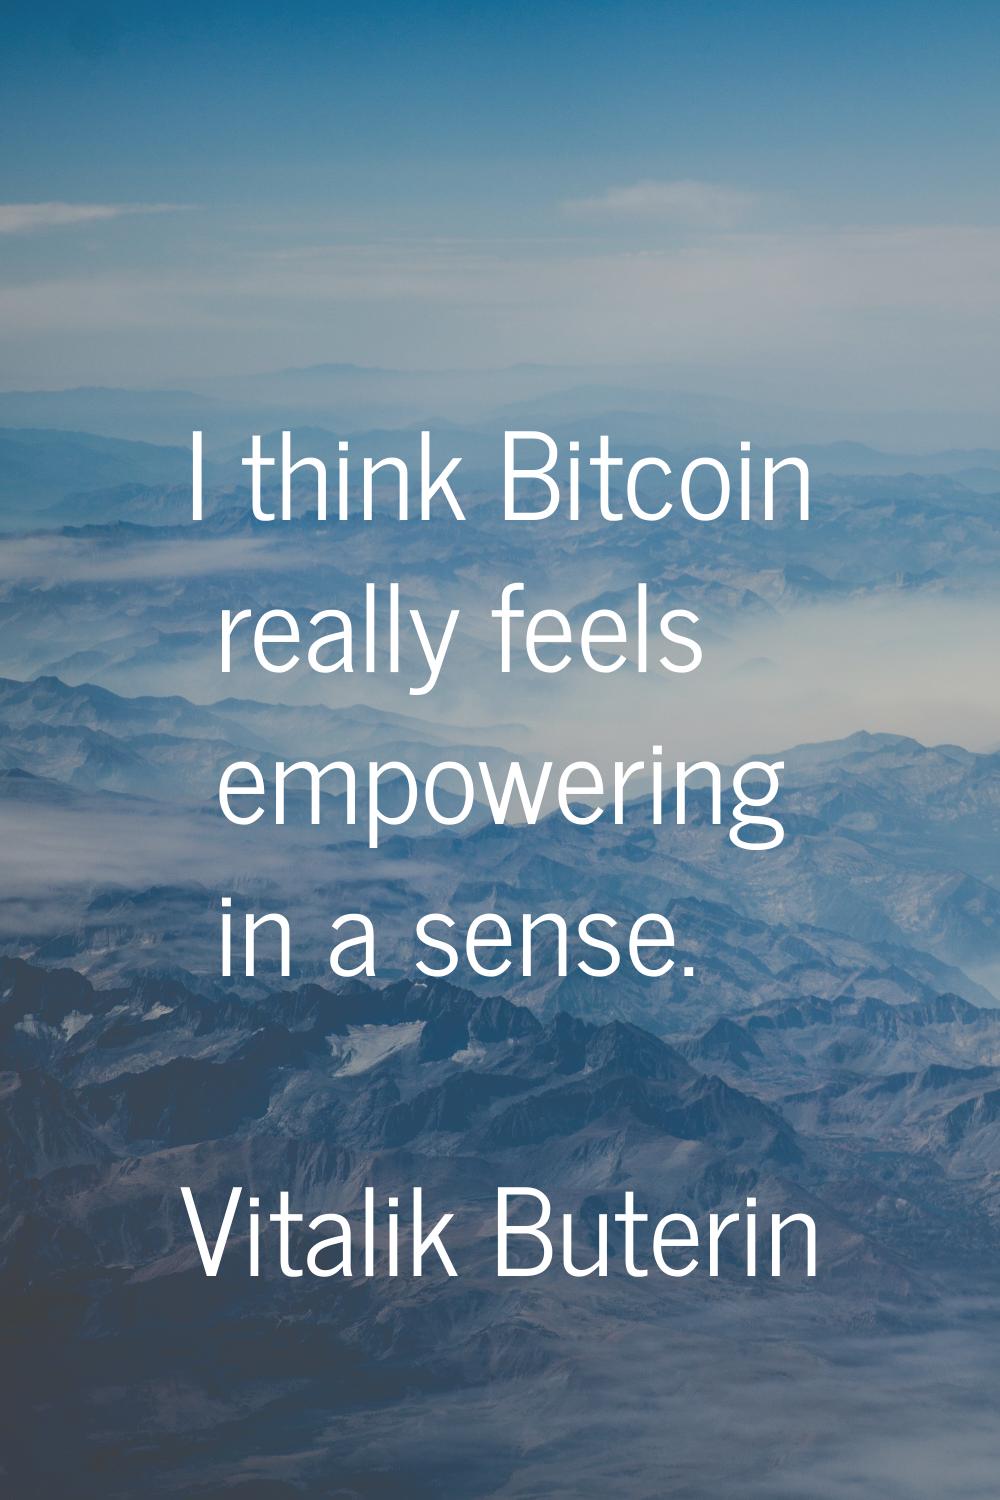 I think Bitcoin really feels empowering in a sense.